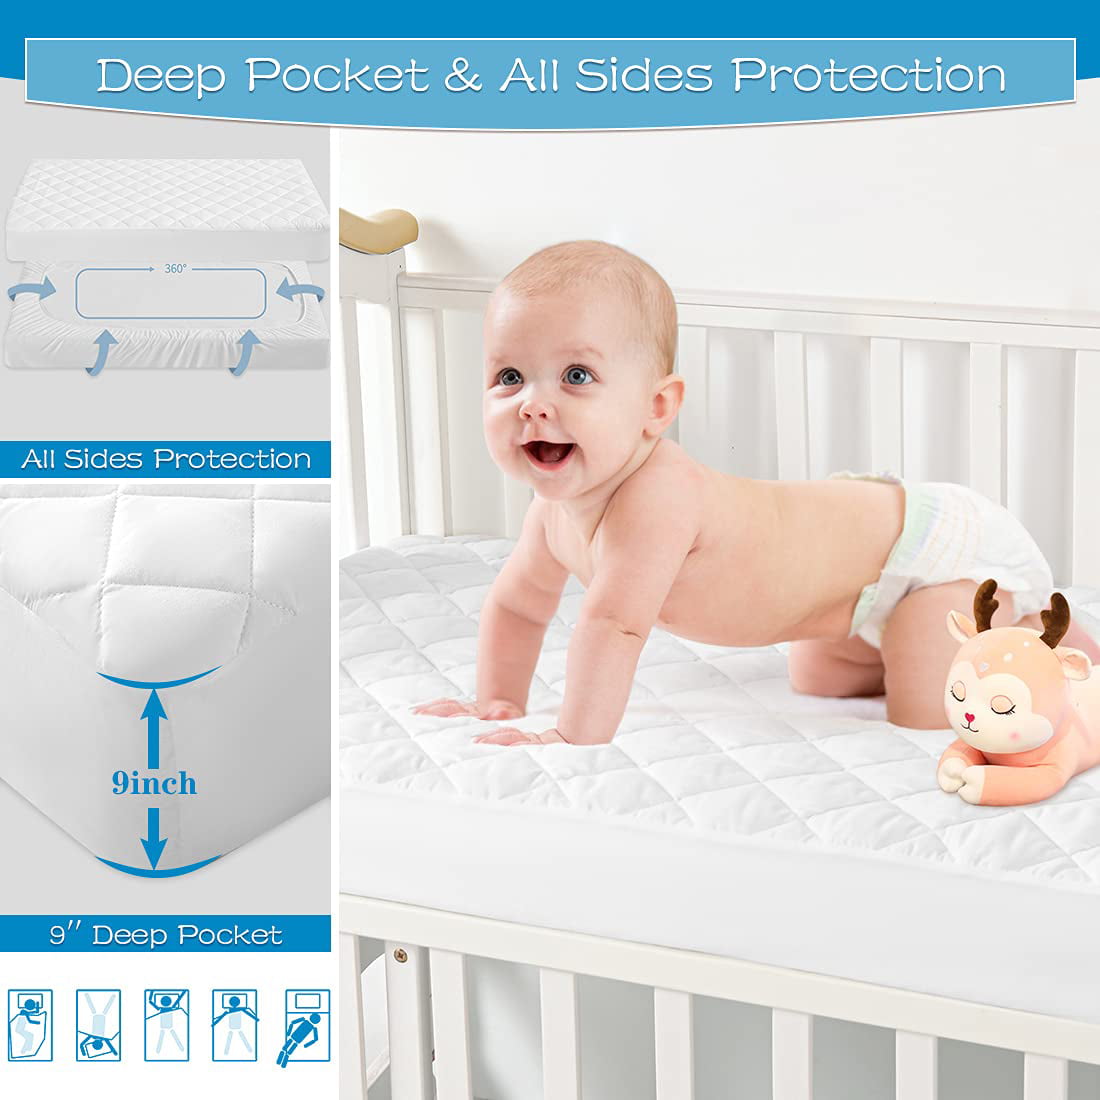 Waterproof Bamboo Crib Mattress Protector Pad 52x28 for Baby Toddler Bed Ultra Soft Breathable Matressprotector Fitted Mattress Cover 2 Pack 